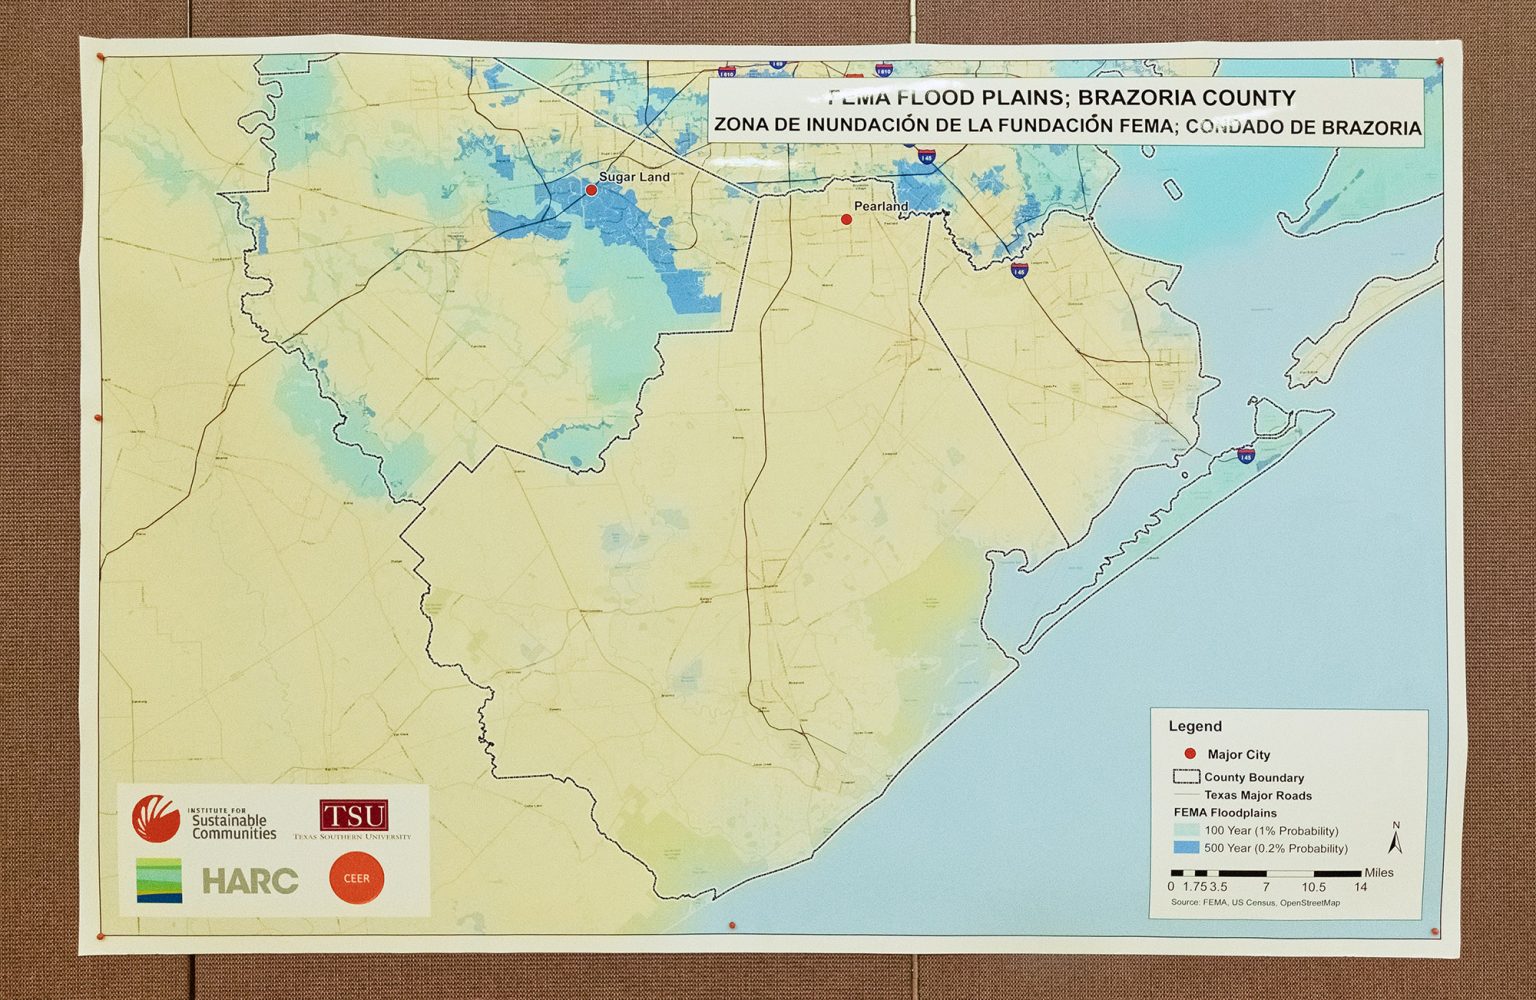 A map from Texas Southern University shows FEMA flood plains in Brazoria County, Texas and hangs on display during CEER’s People’s Hearing event April 30, 2022 in Houston, Texas.